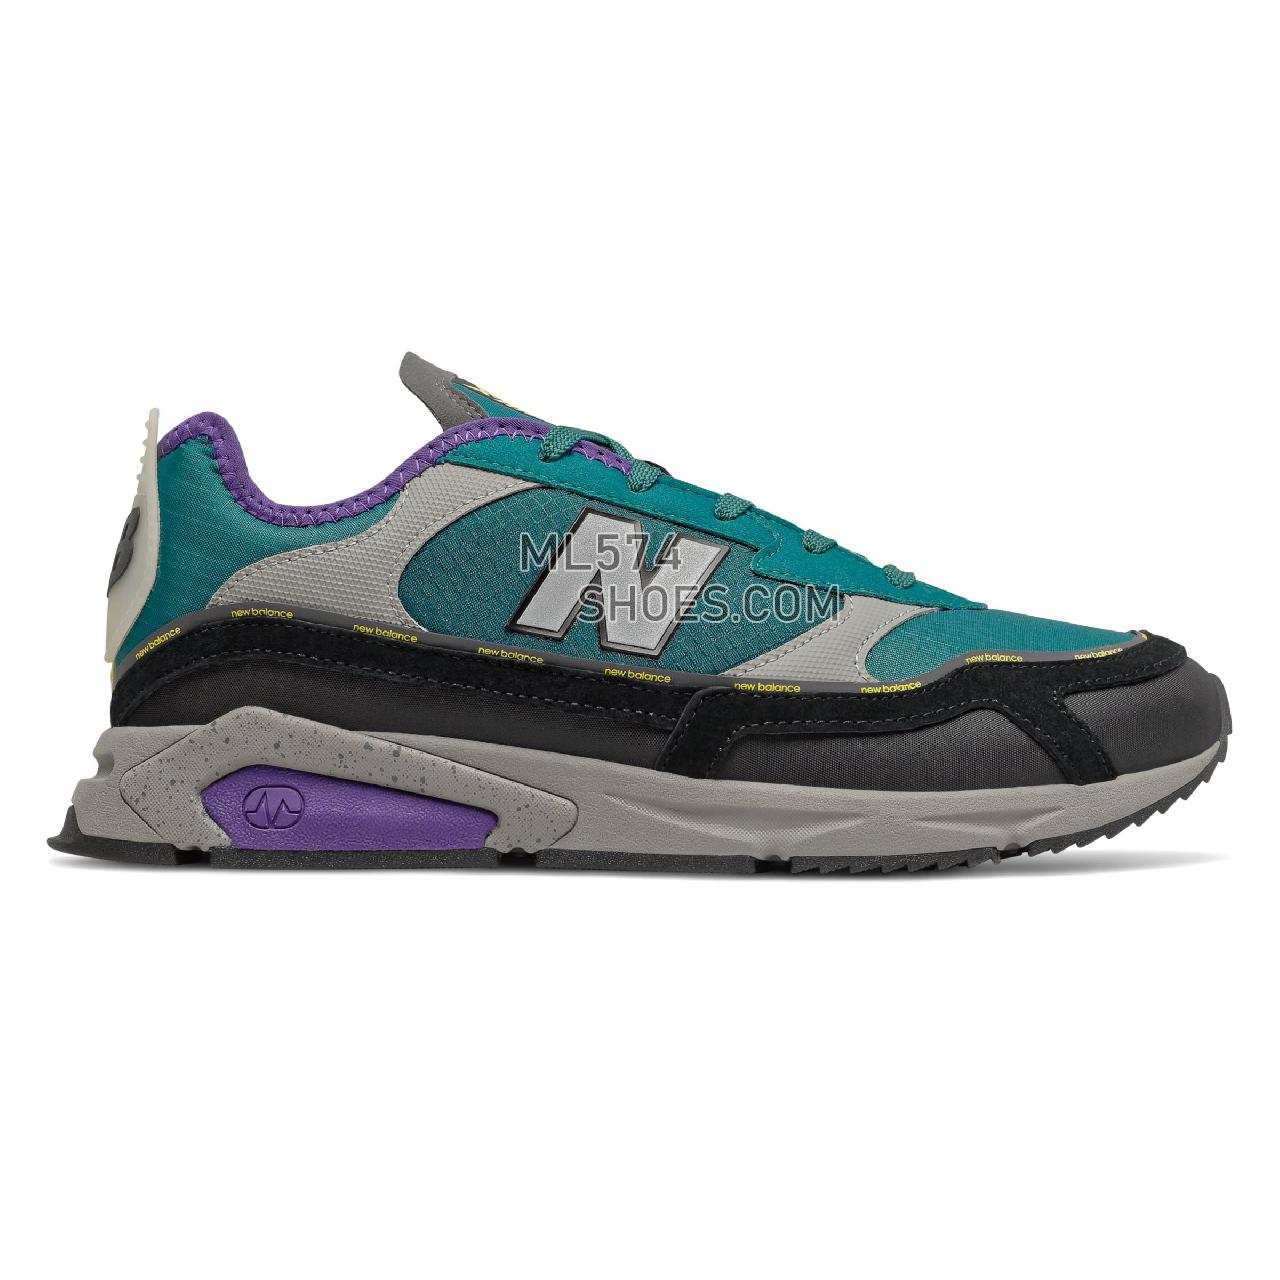 New Balance X-Racer - Men's Sport Style Sneakers - Team Teal with Black and Prism Purple - MSXRCHSC